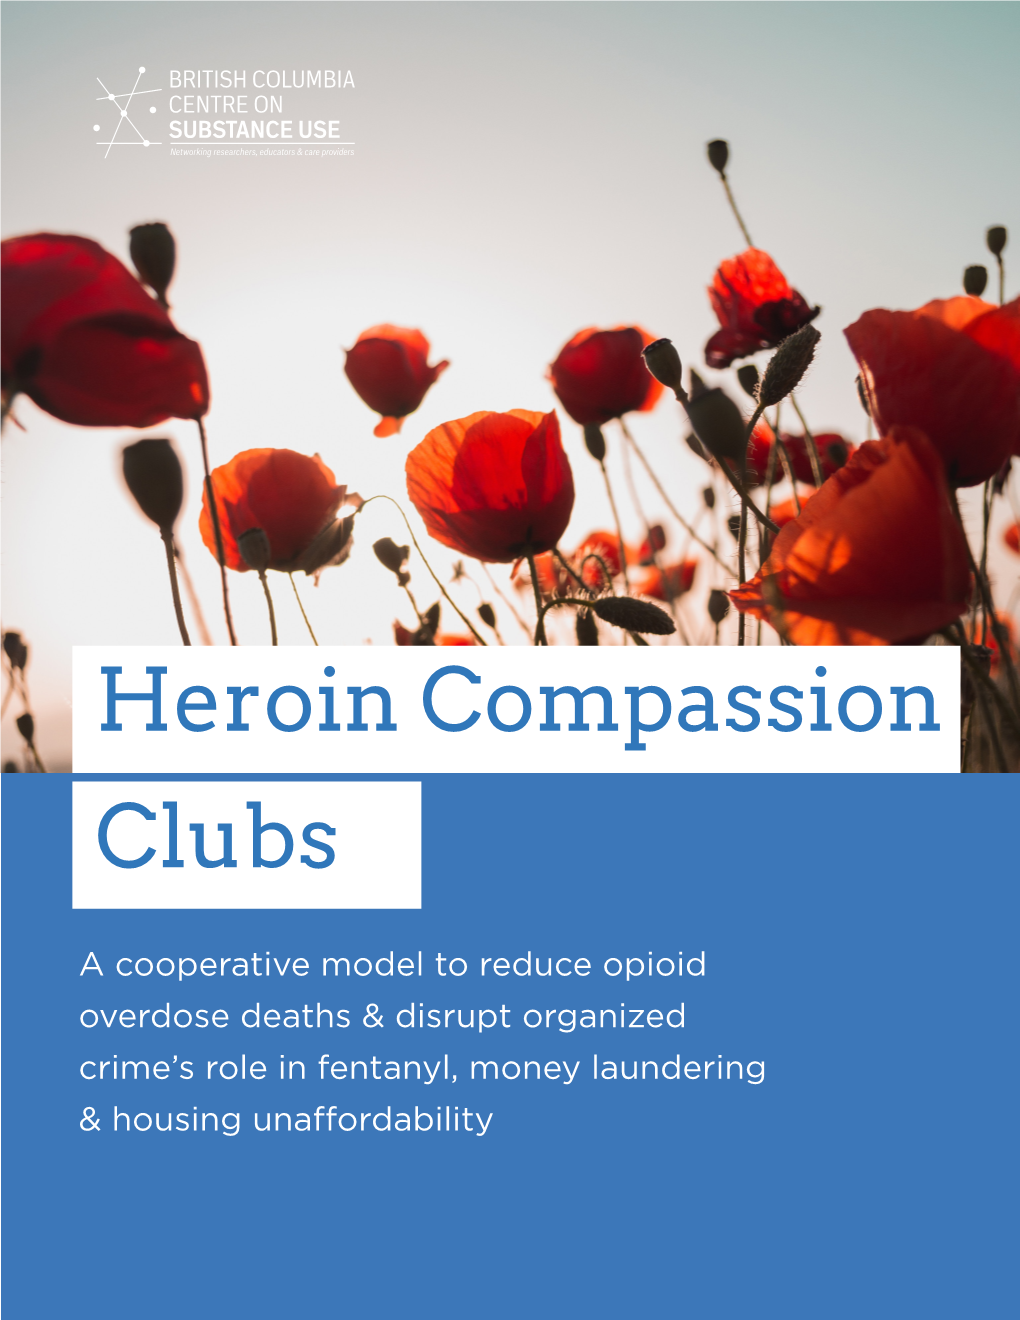 Heroin Compassion Clubs